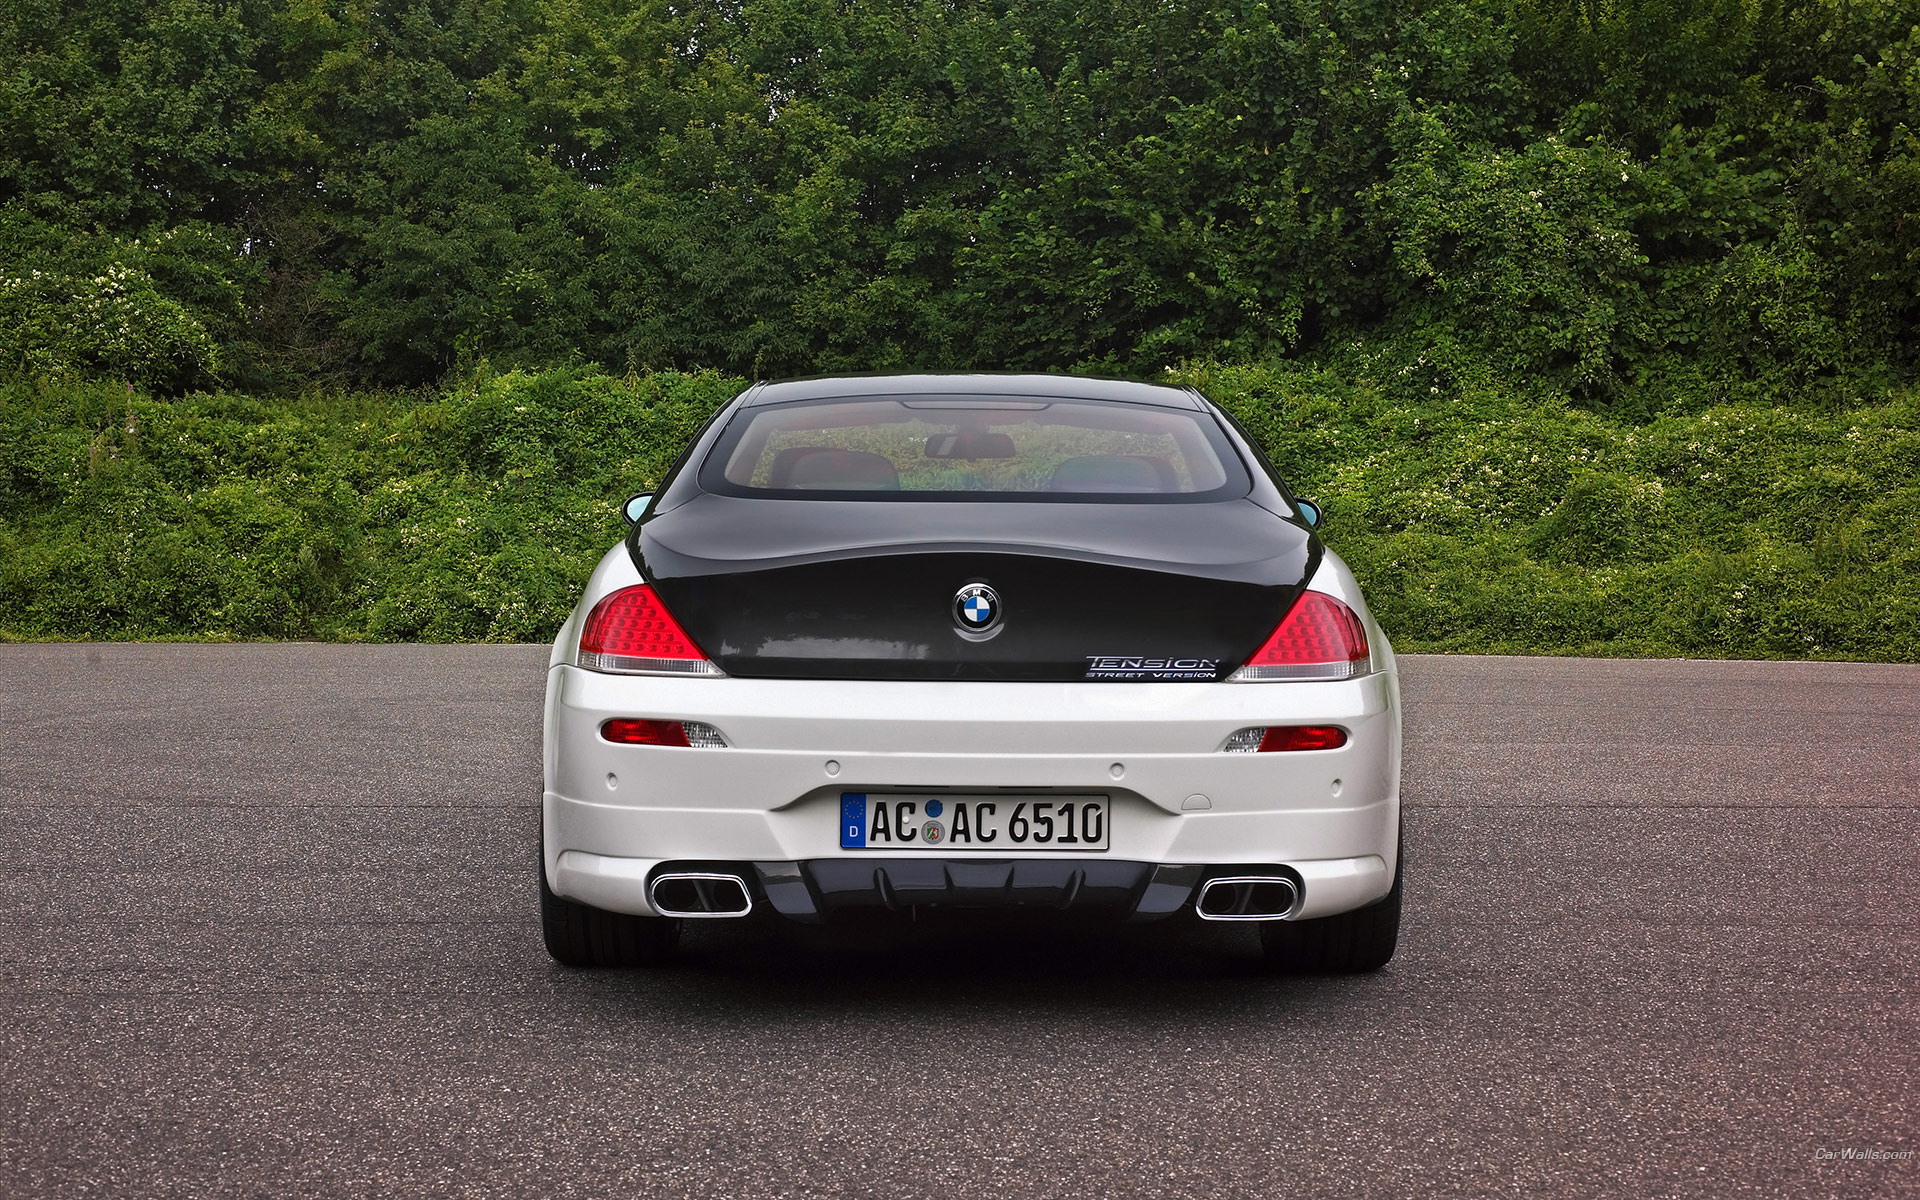 Download High quality 6 tension back Bmw wallpaper / 1920x1200